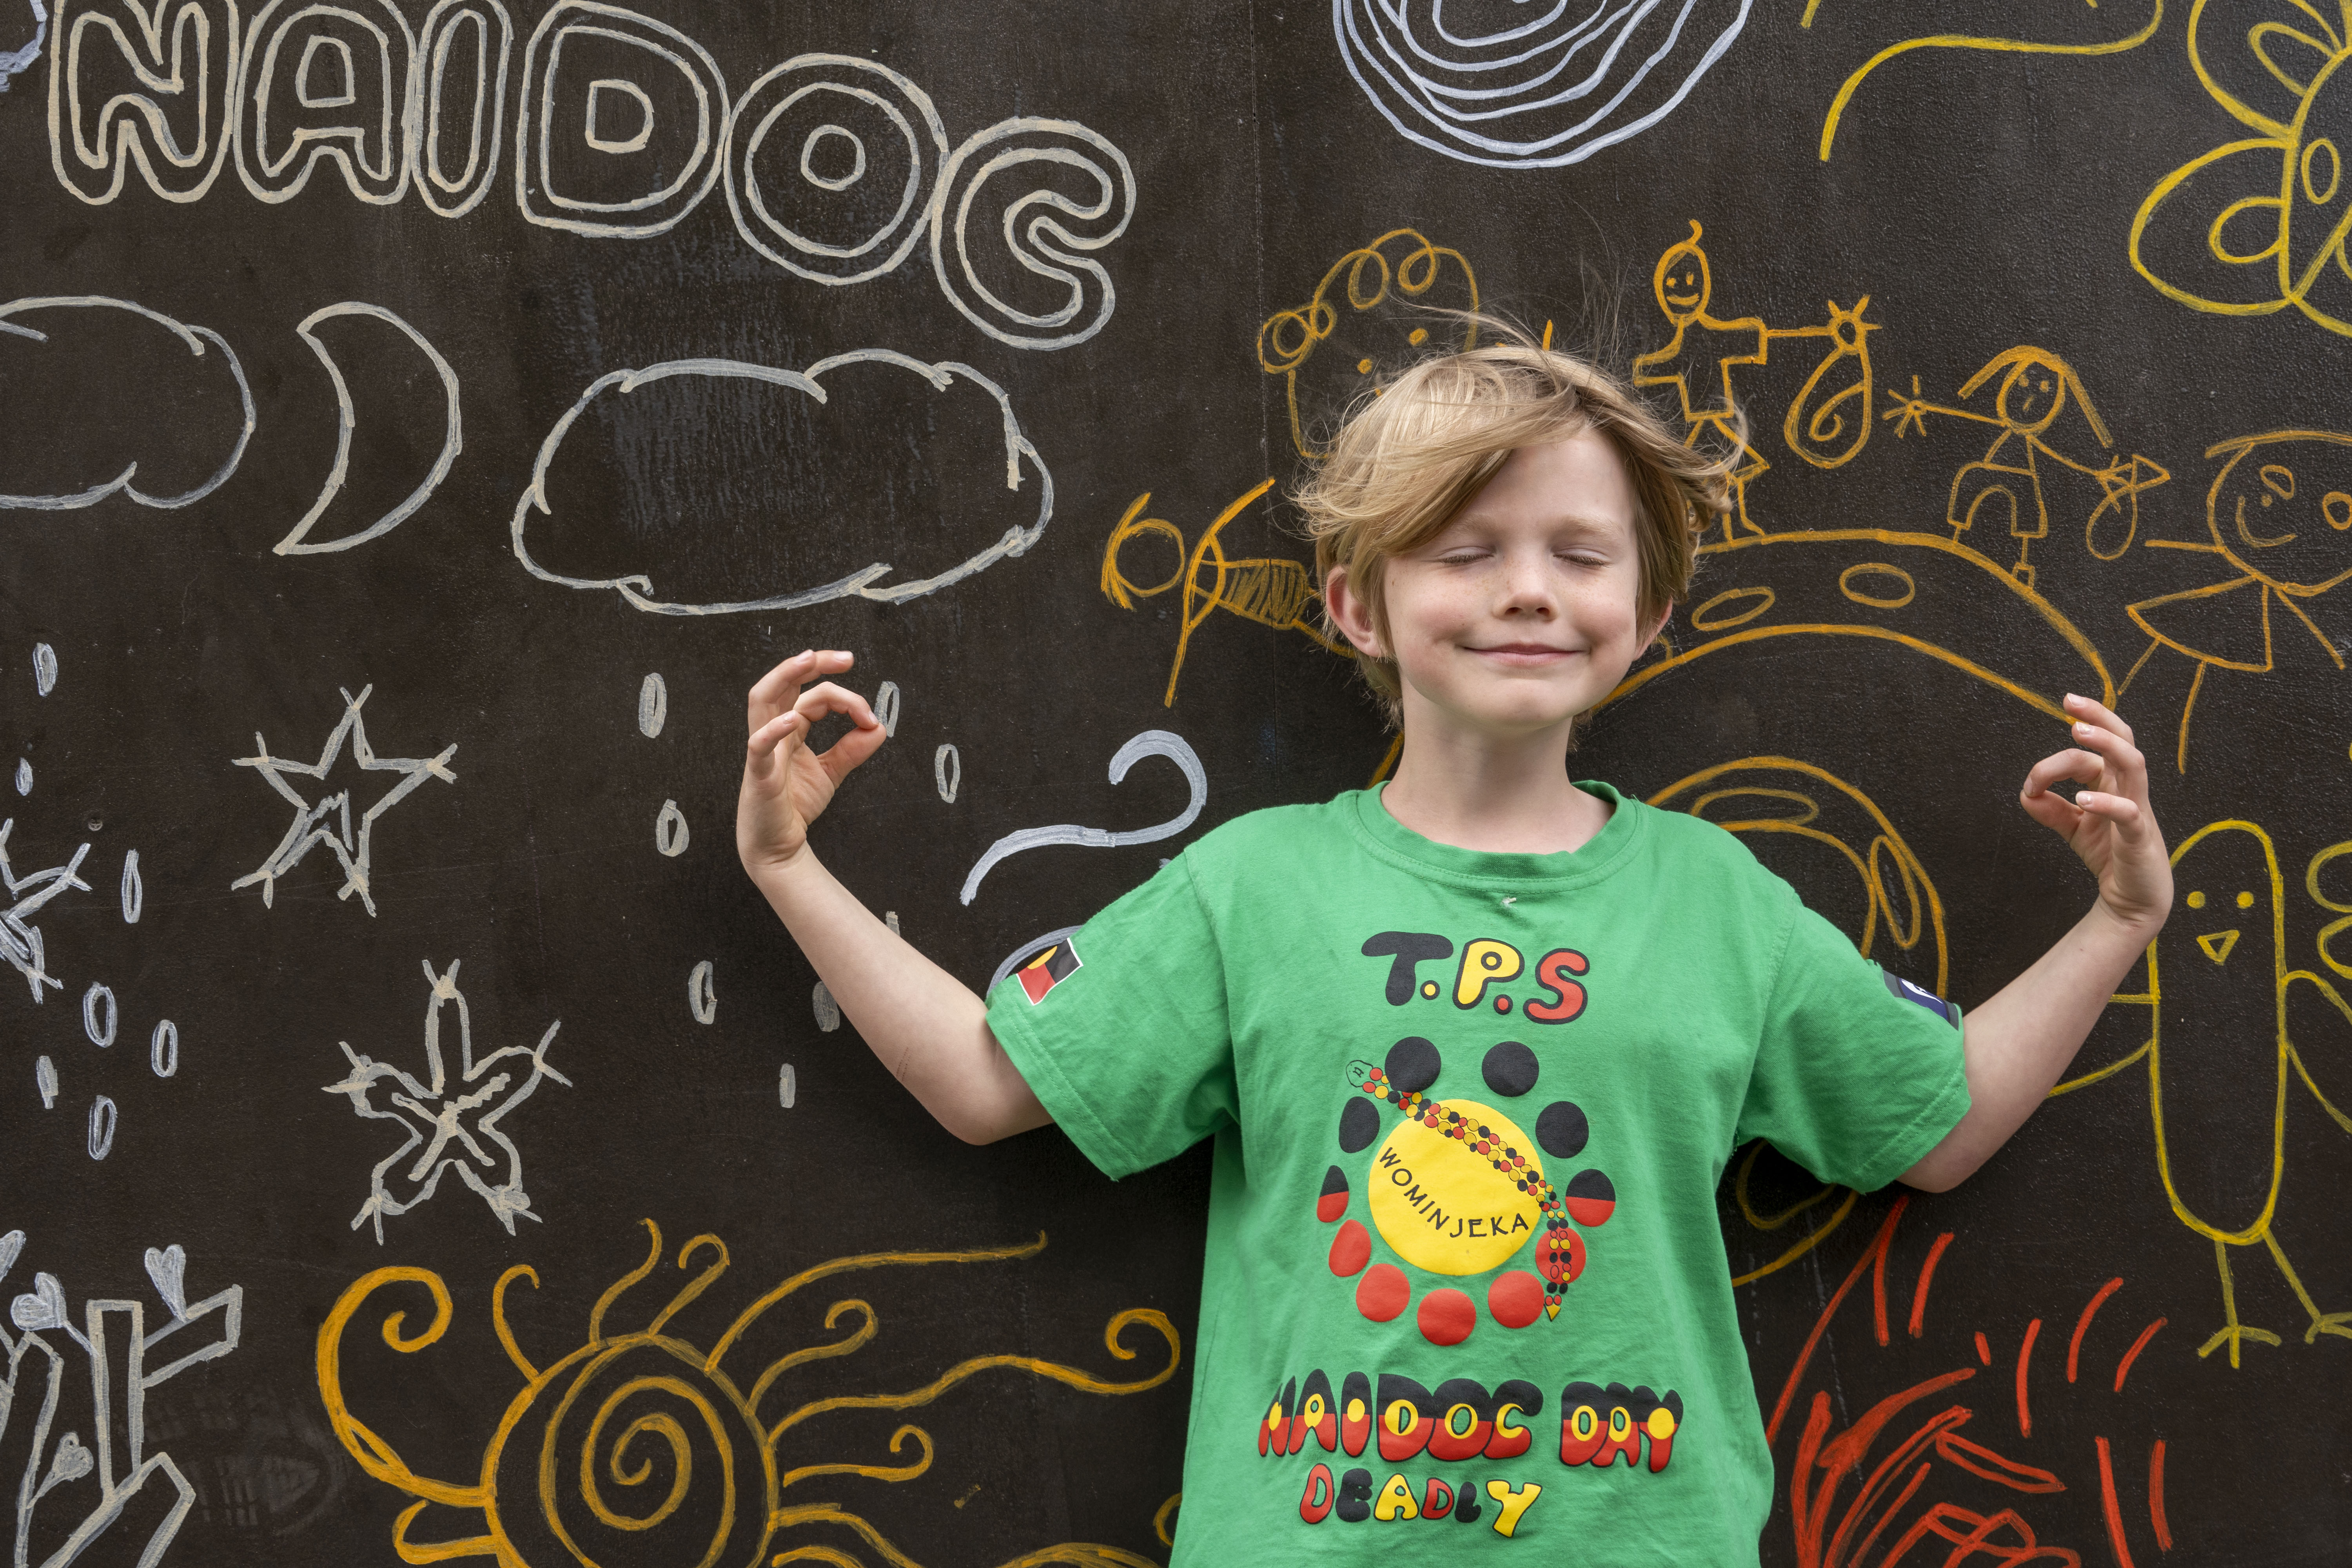 Primary school aged boy in a NAIDOC t-shirt standing in front of a chalk wall covered in children's drawings. He is standing with his eyes closed, a smile on his face, with his arms raised and his index fingers touching his thumbs.